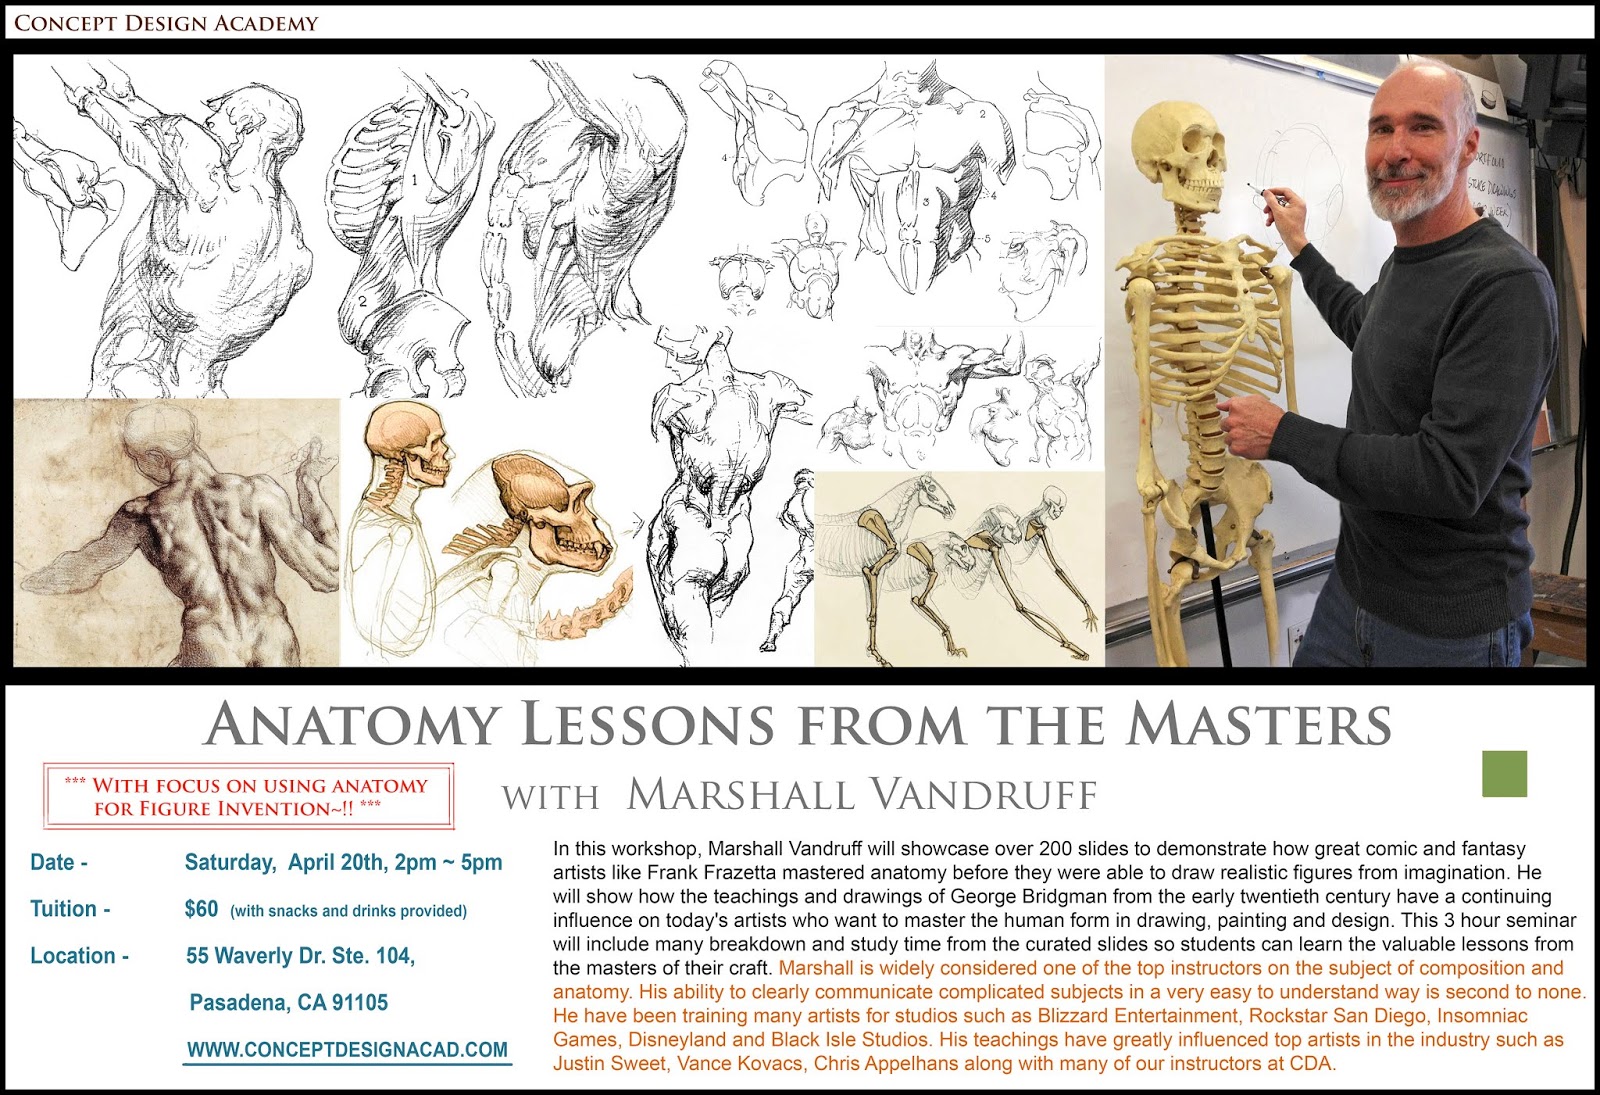 Concept Design Academy Anatomy Lessons From The Masters With